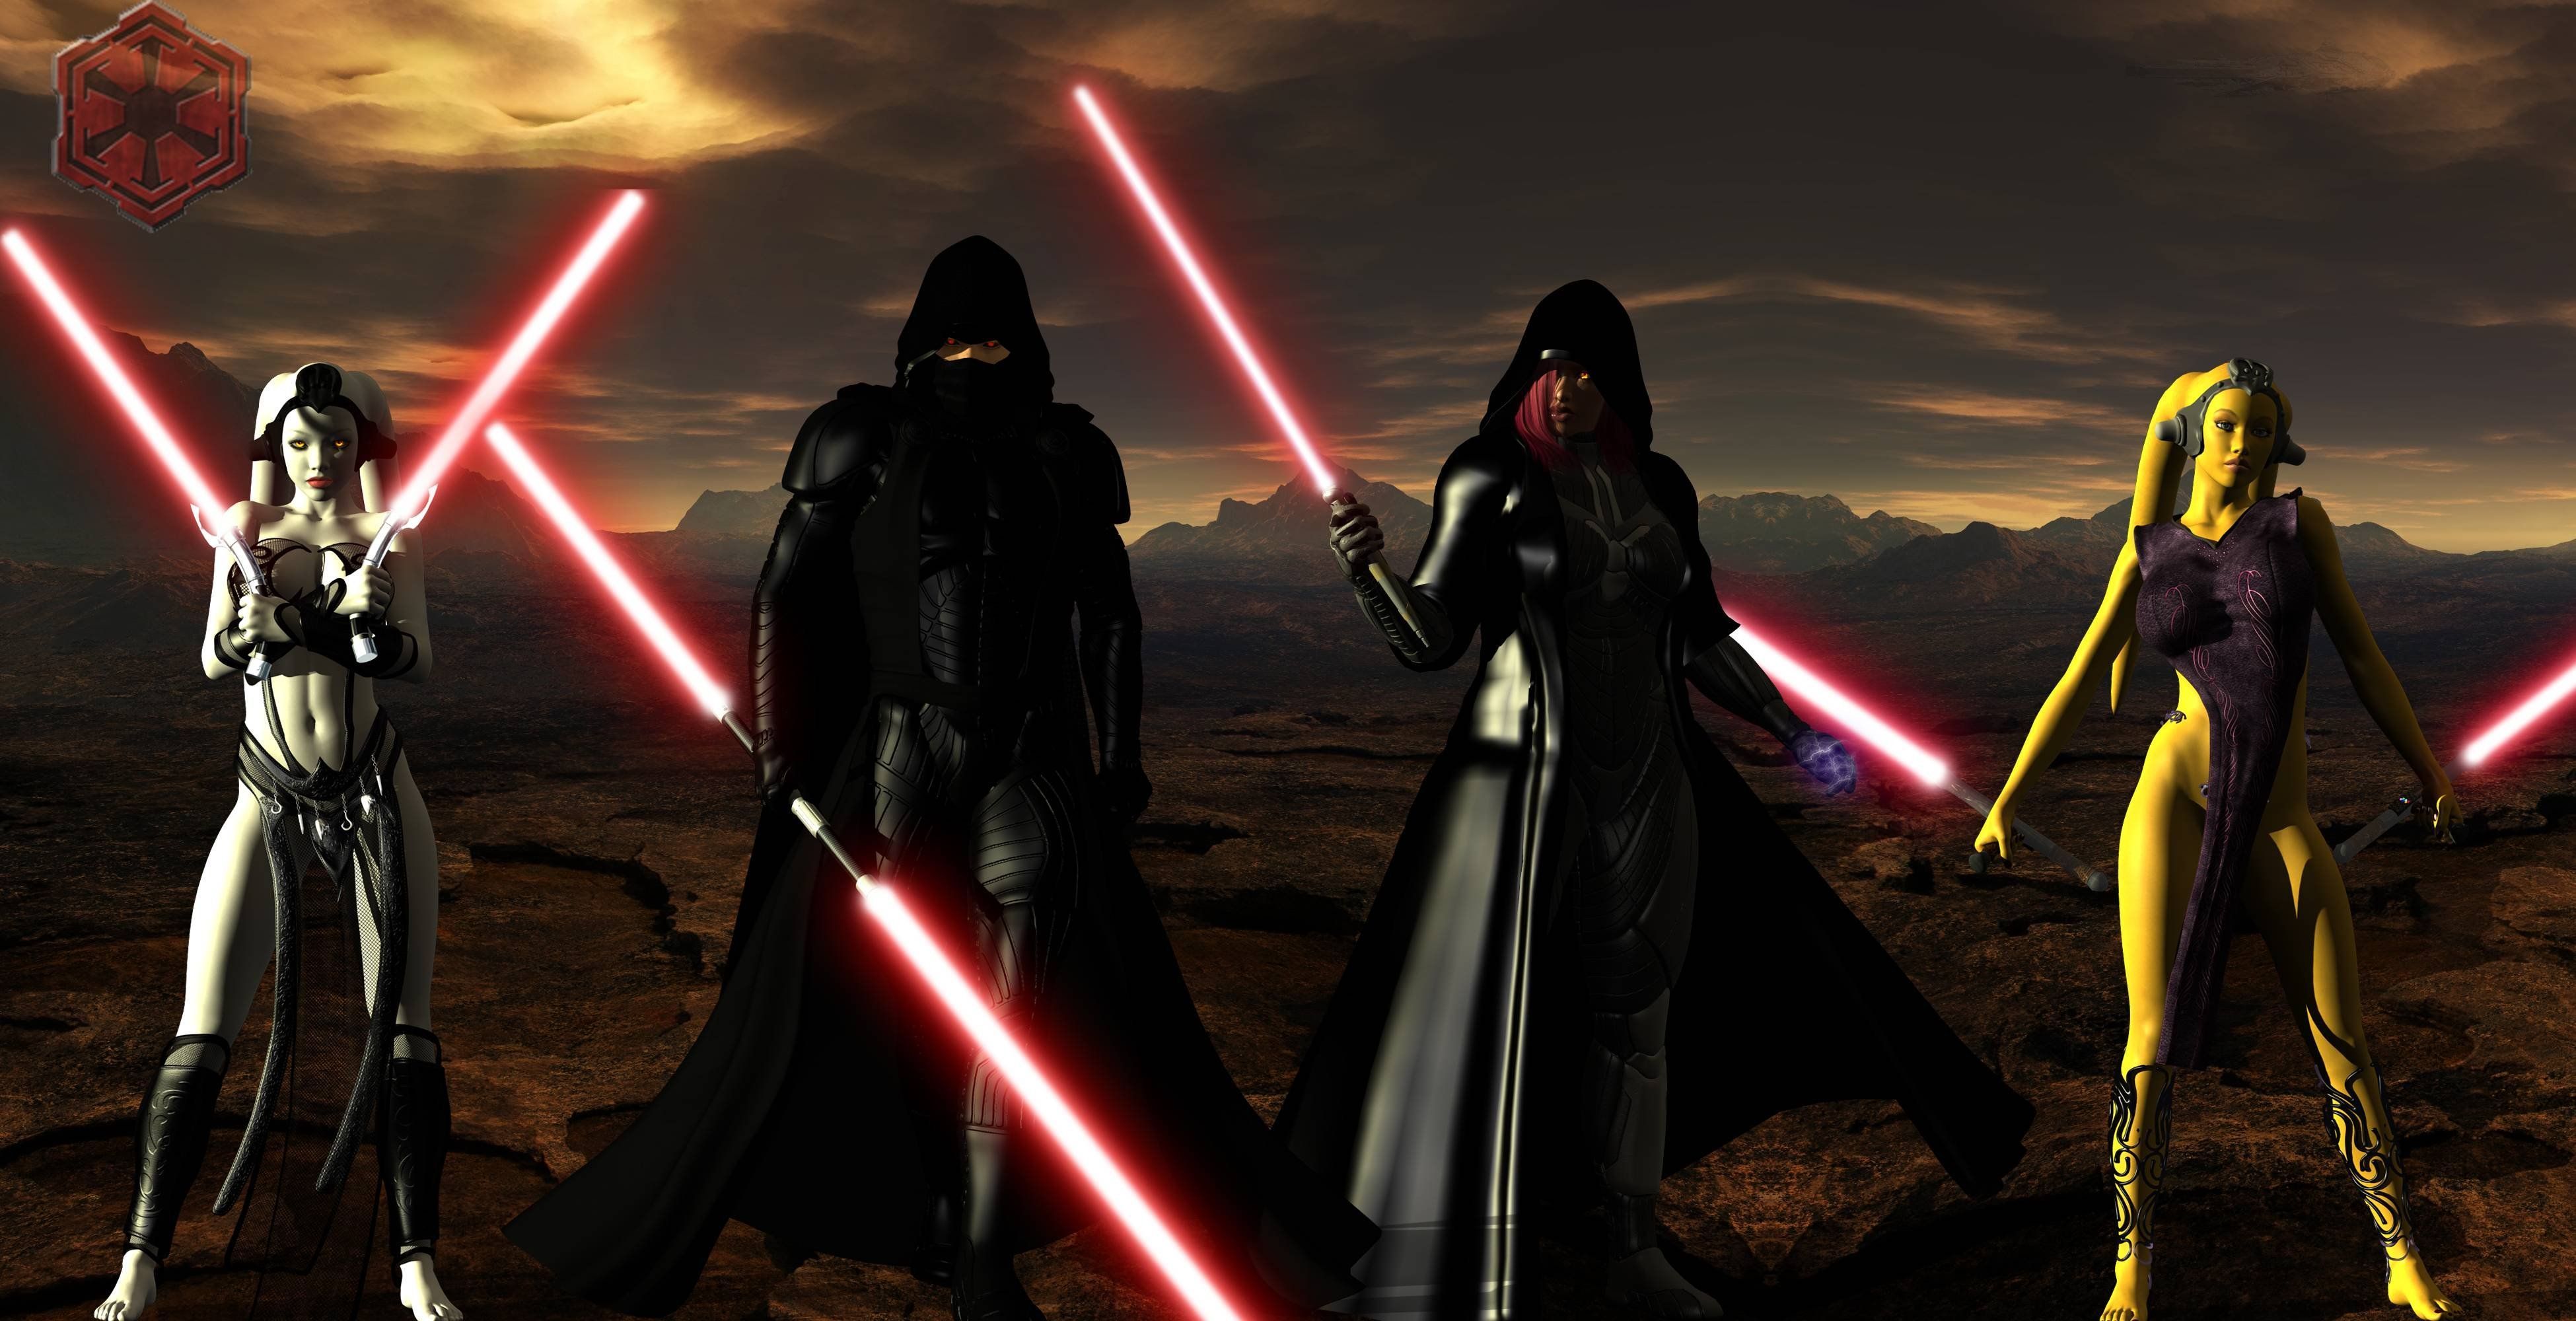 Swtor Wallpapers | HD Apple Wallpapers 1080p